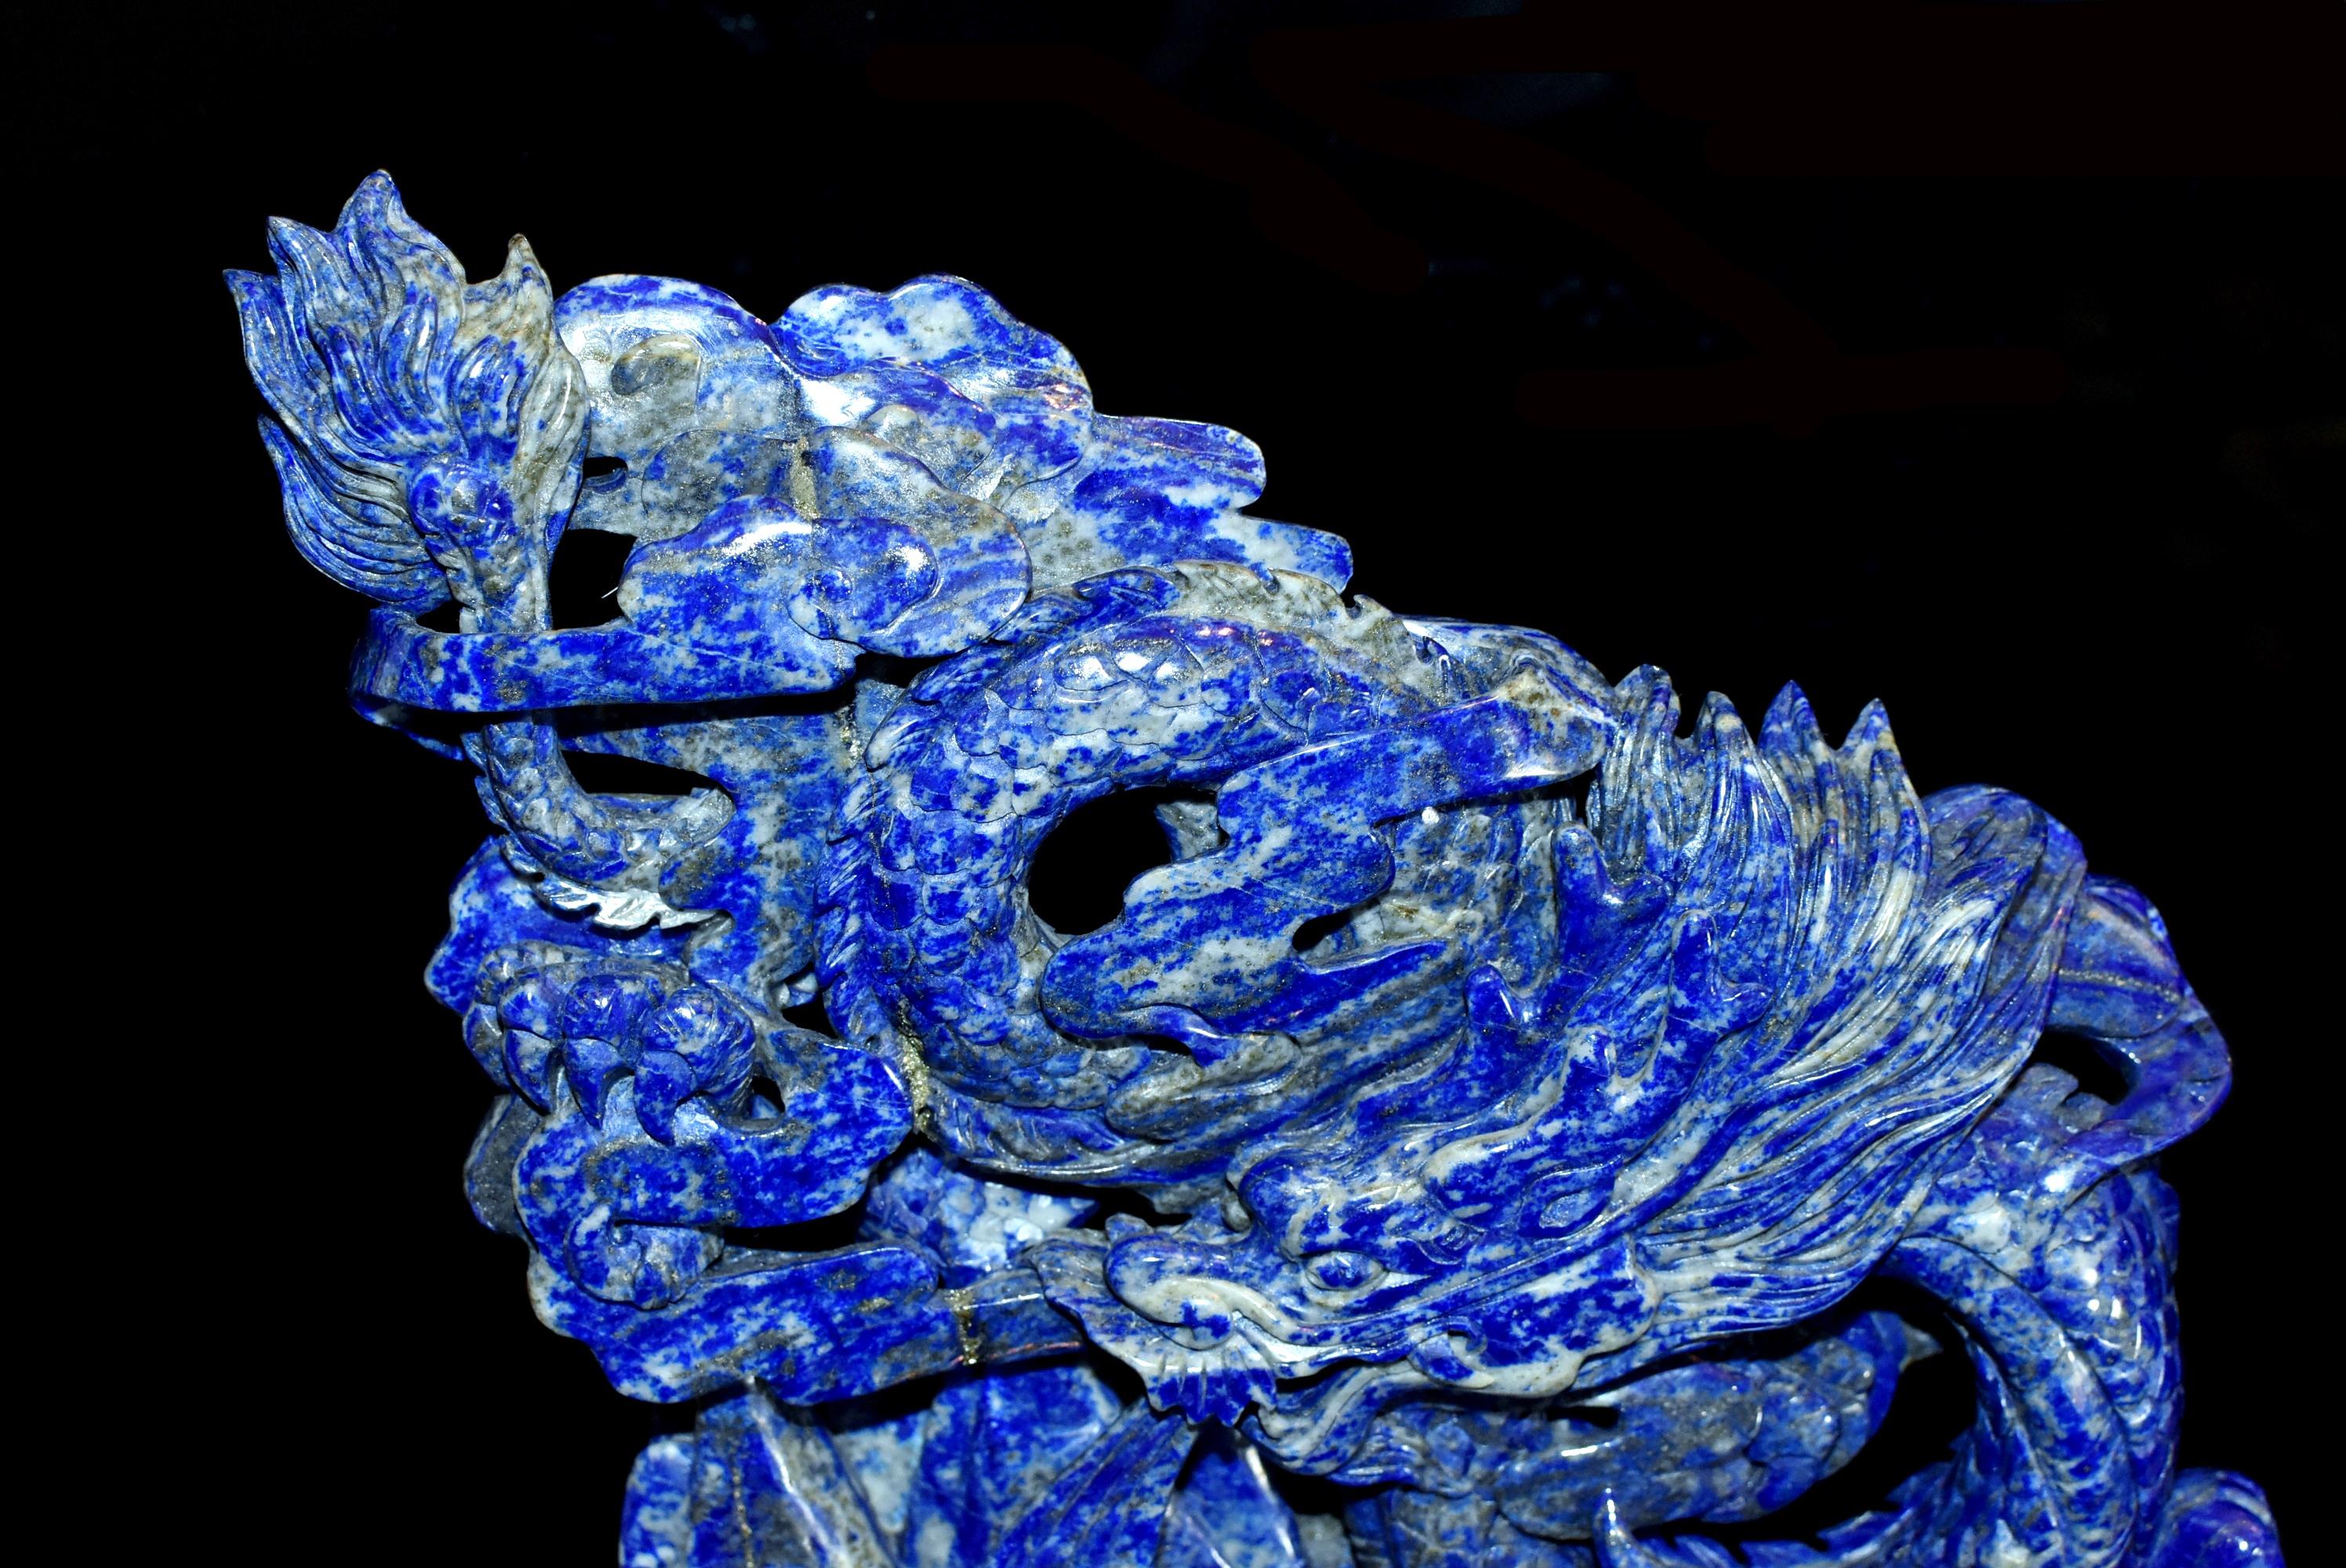 Afghan Natural Lapis Lazuli Dragon Multi-Dimensional Hand Carved For Sale